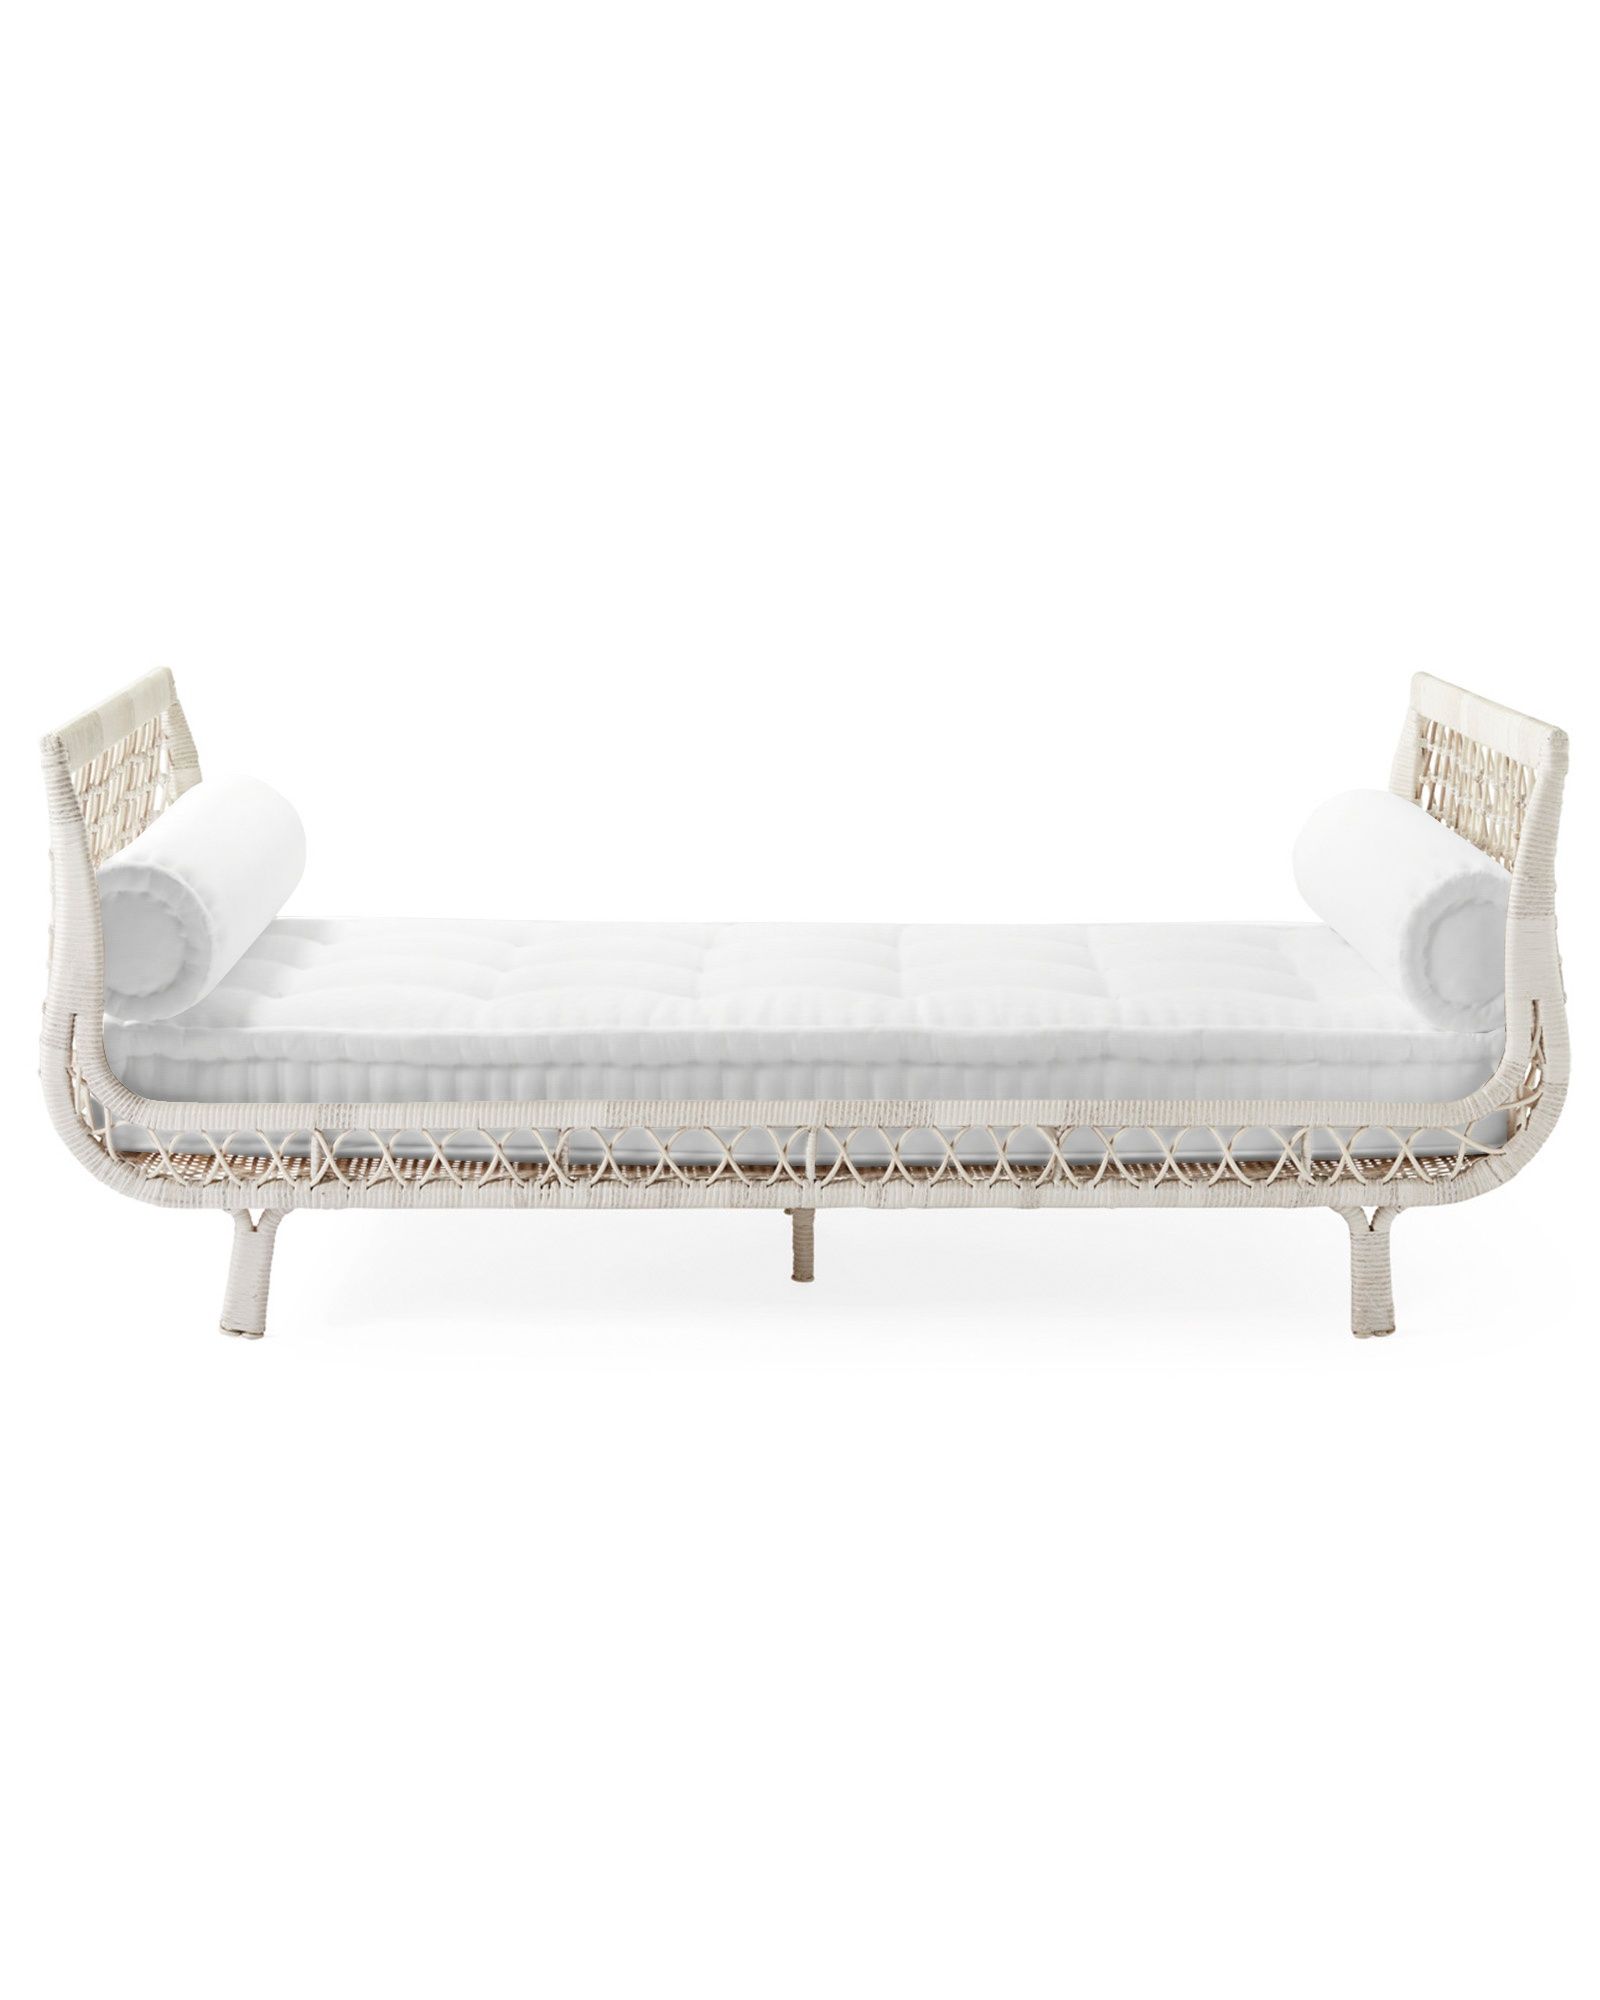 Capistrano Daybed - Driftwood | Serena and Lily